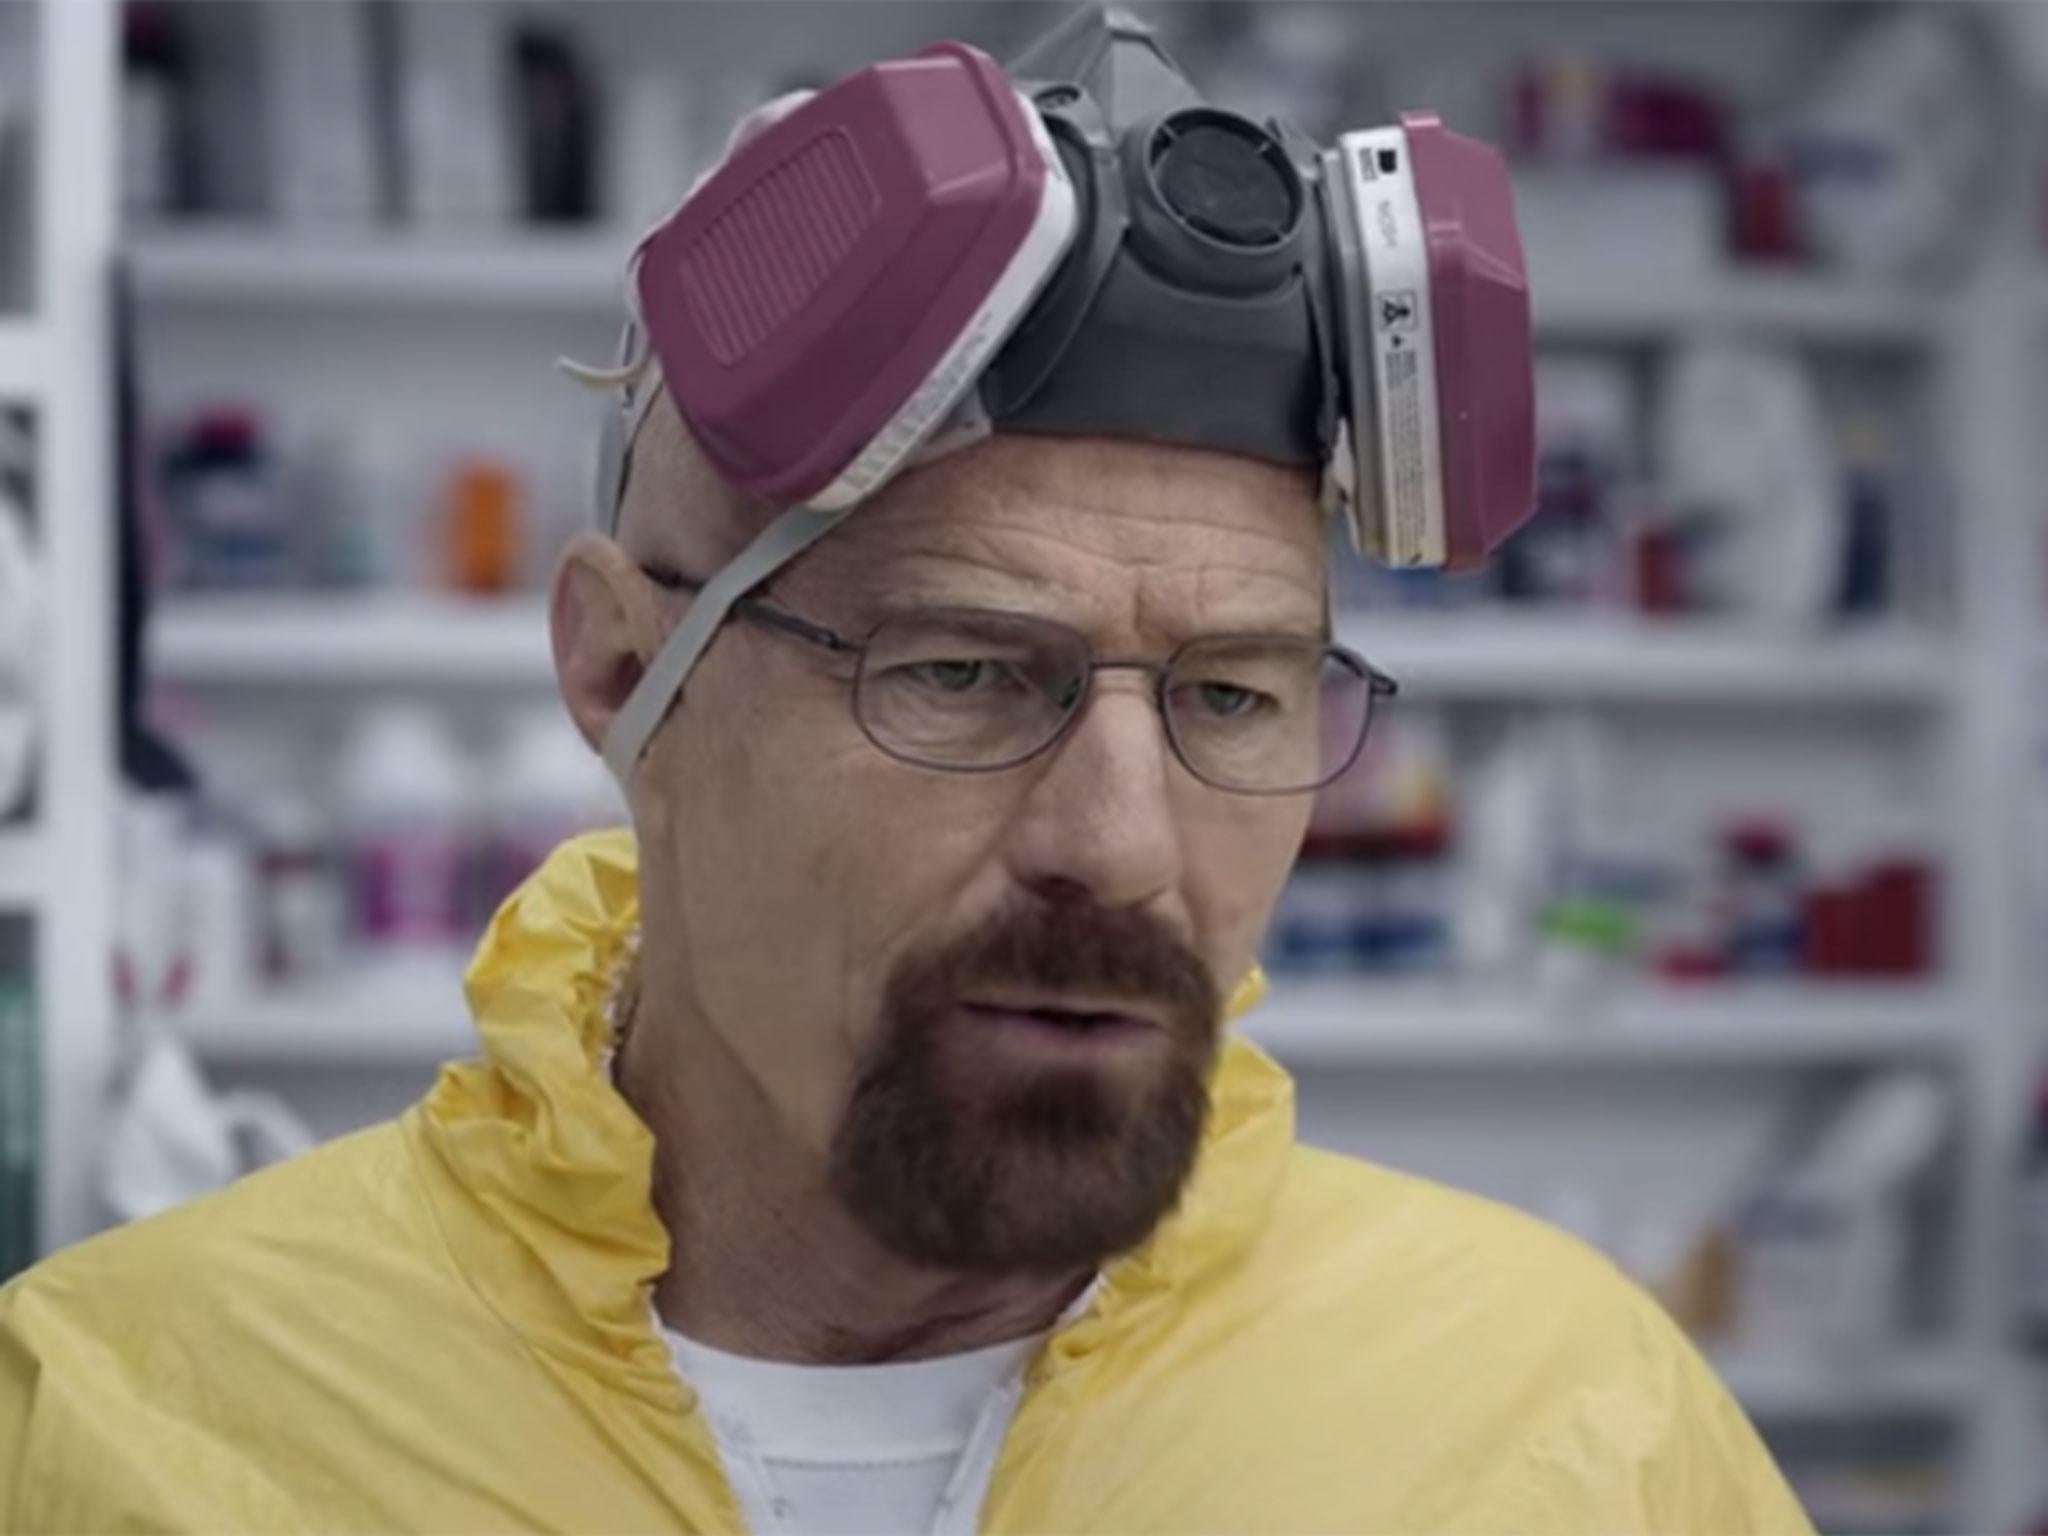 The Walter White character was among this year's Super Bowl advert surprises